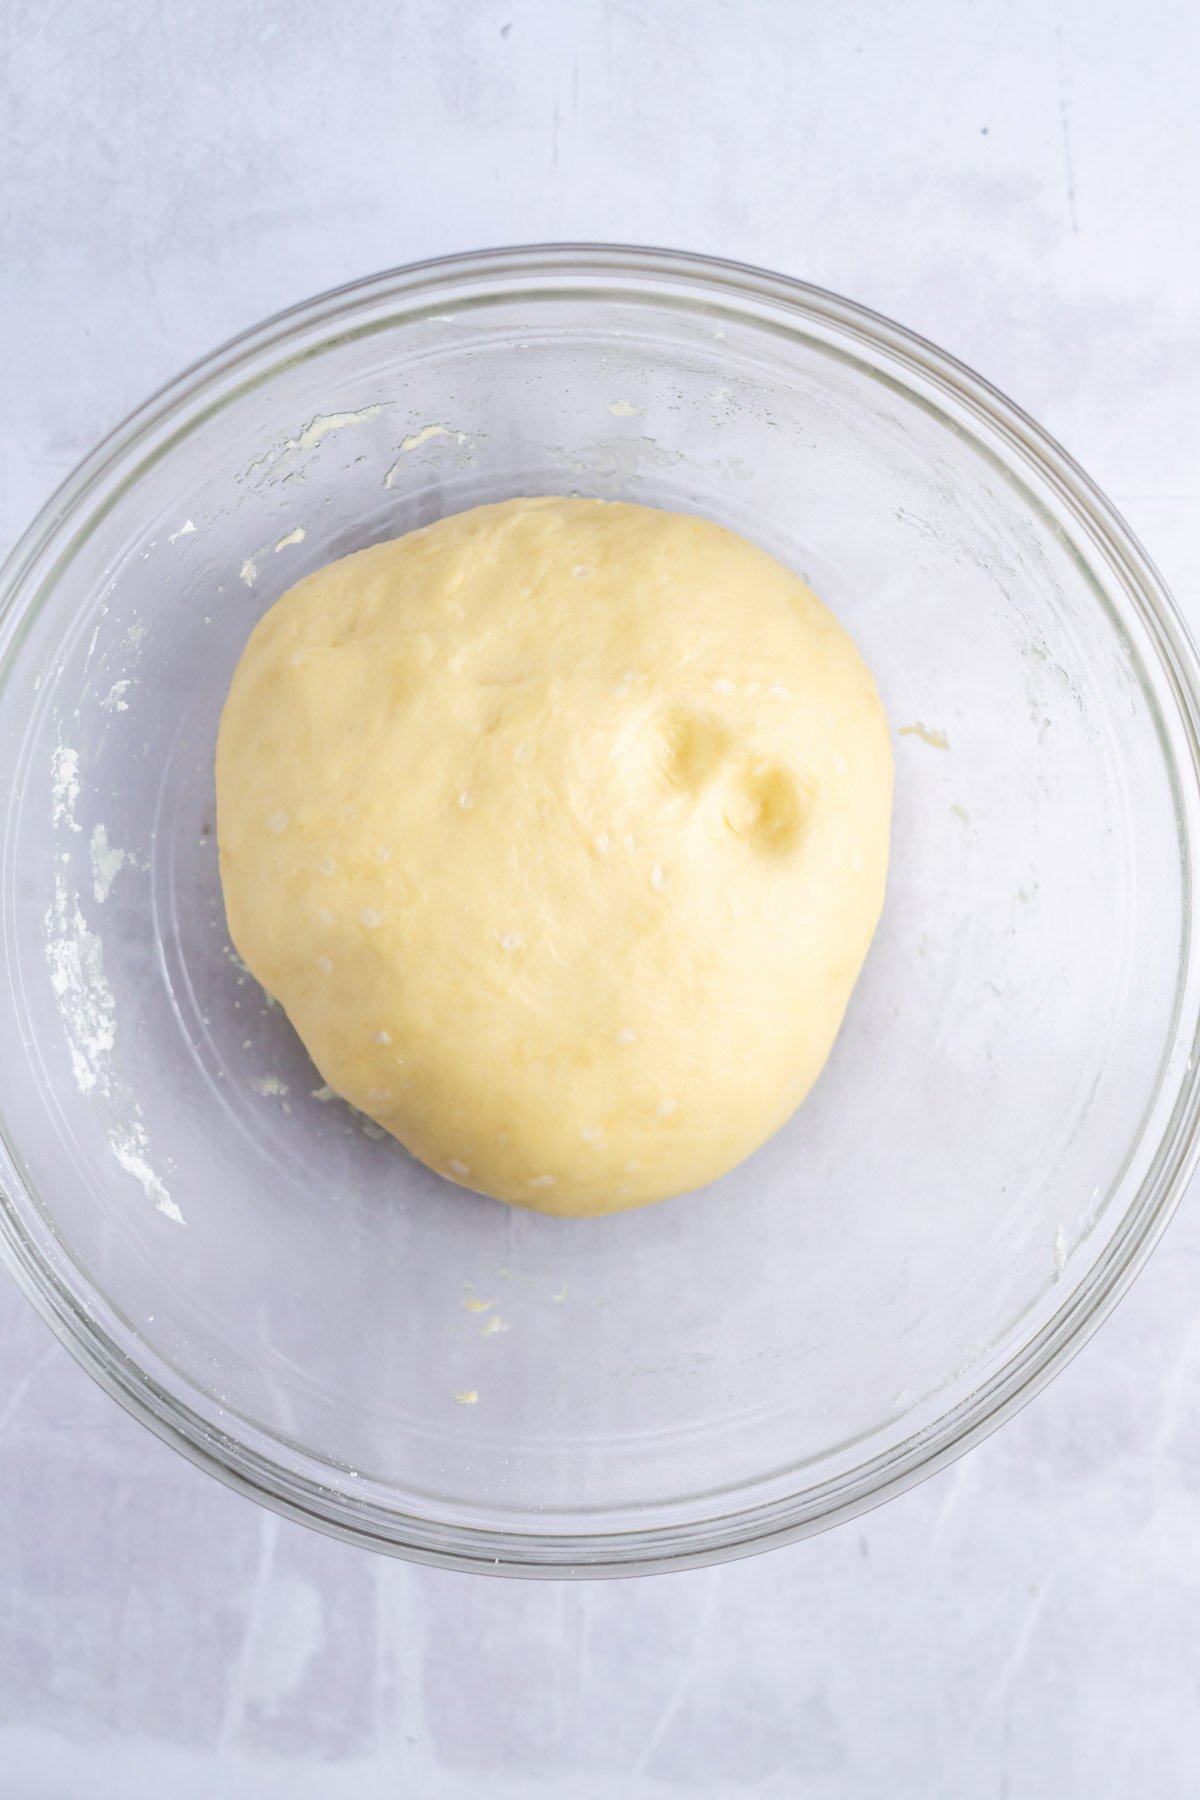 small batch cinnamon roll dough after the first rise, showing the dough holding a finger imprint